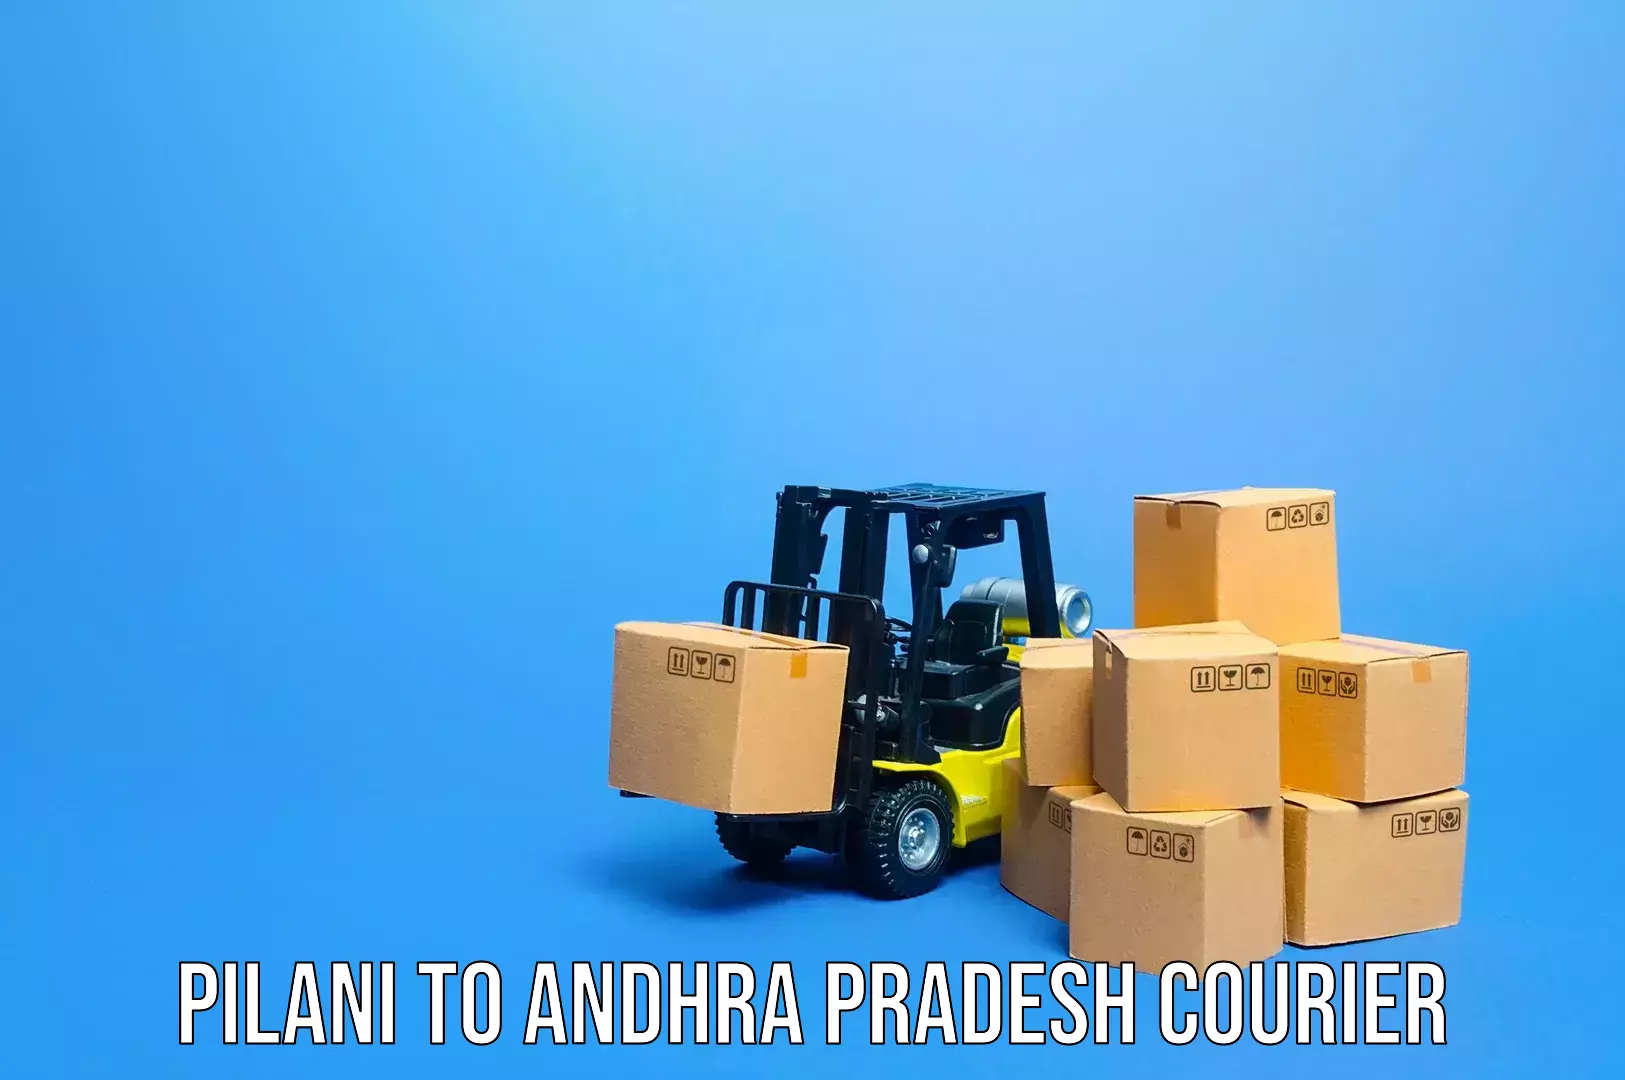 Luggage shipping specialists Pilani to Andhra Pradesh